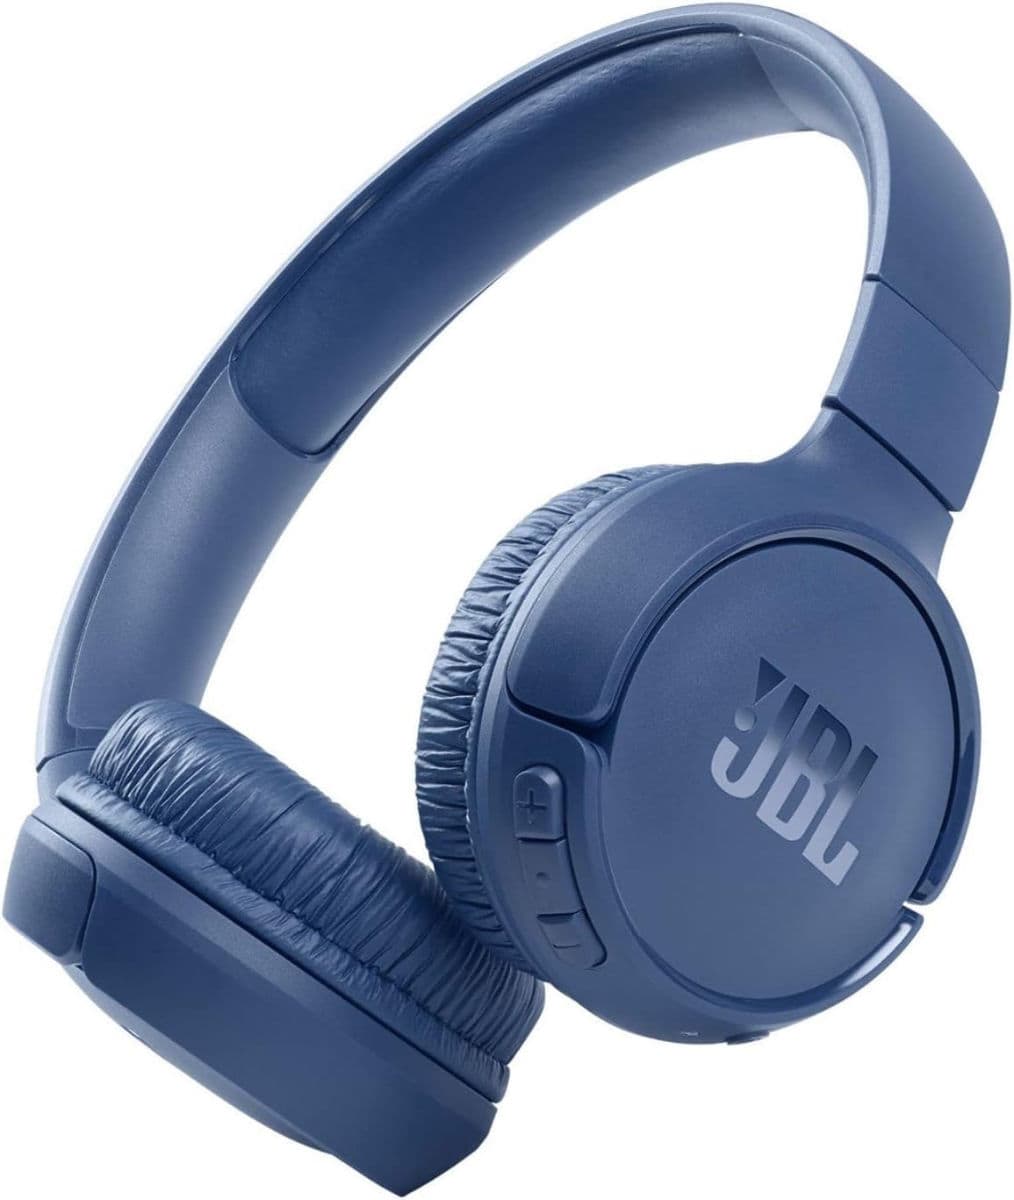 just slashed prices on these 'incredible' JBL headphones — save 50%